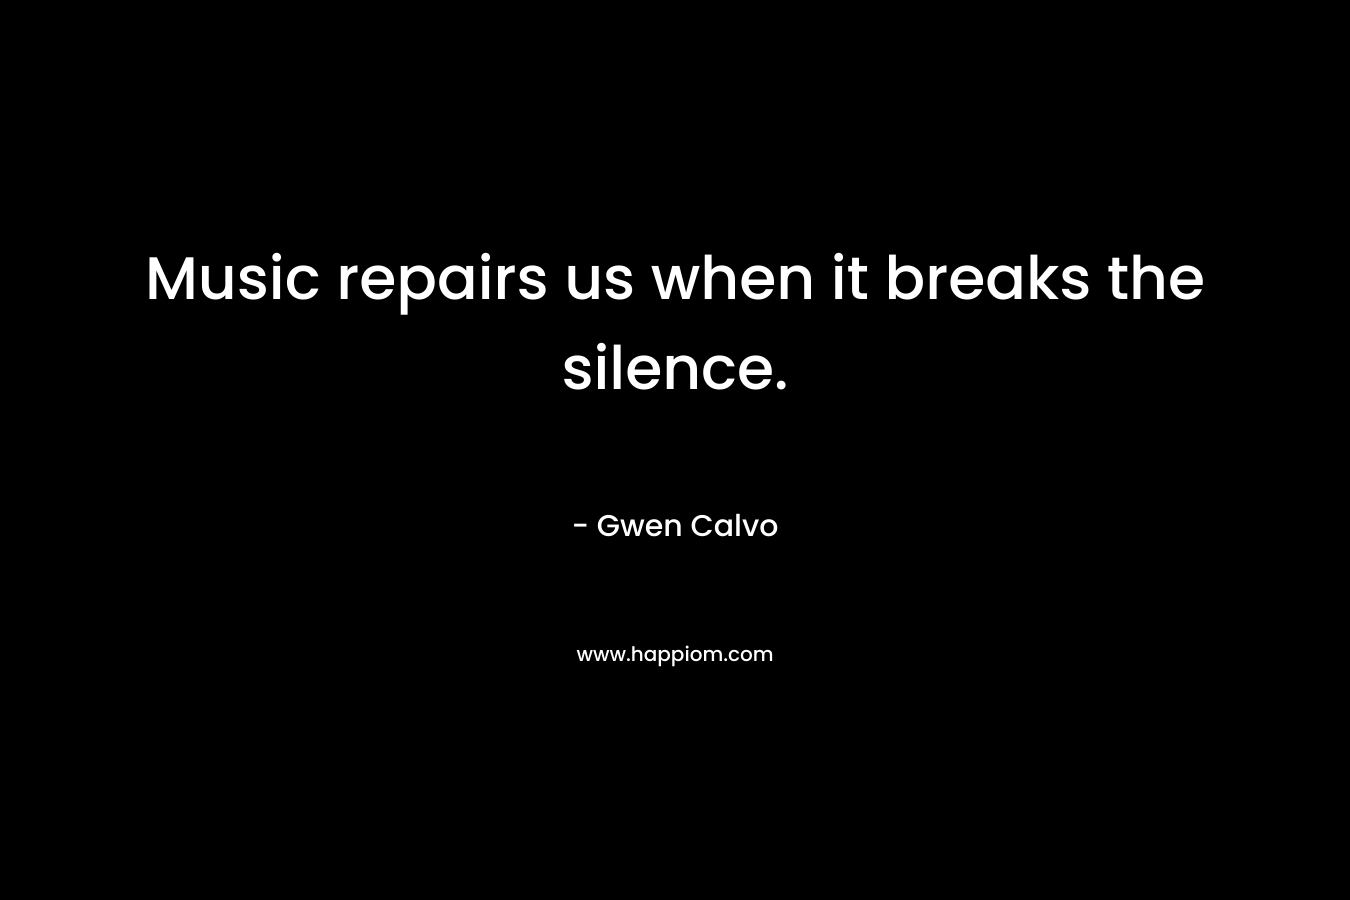 Music repairs us when it breaks the silence.